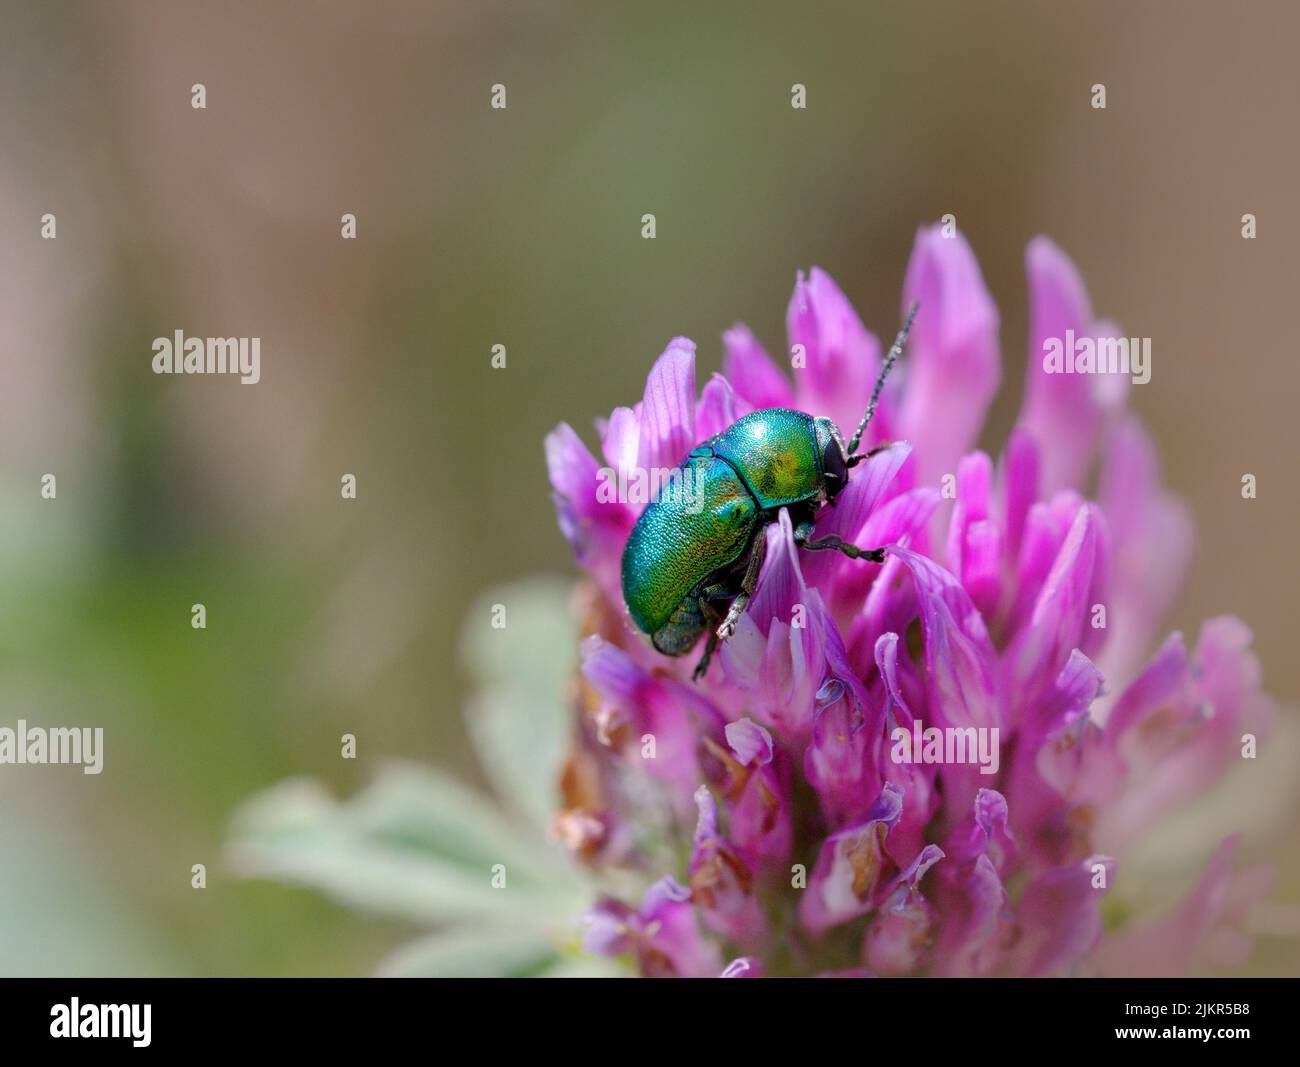 Colorful bug on a purple flower Stock Photo